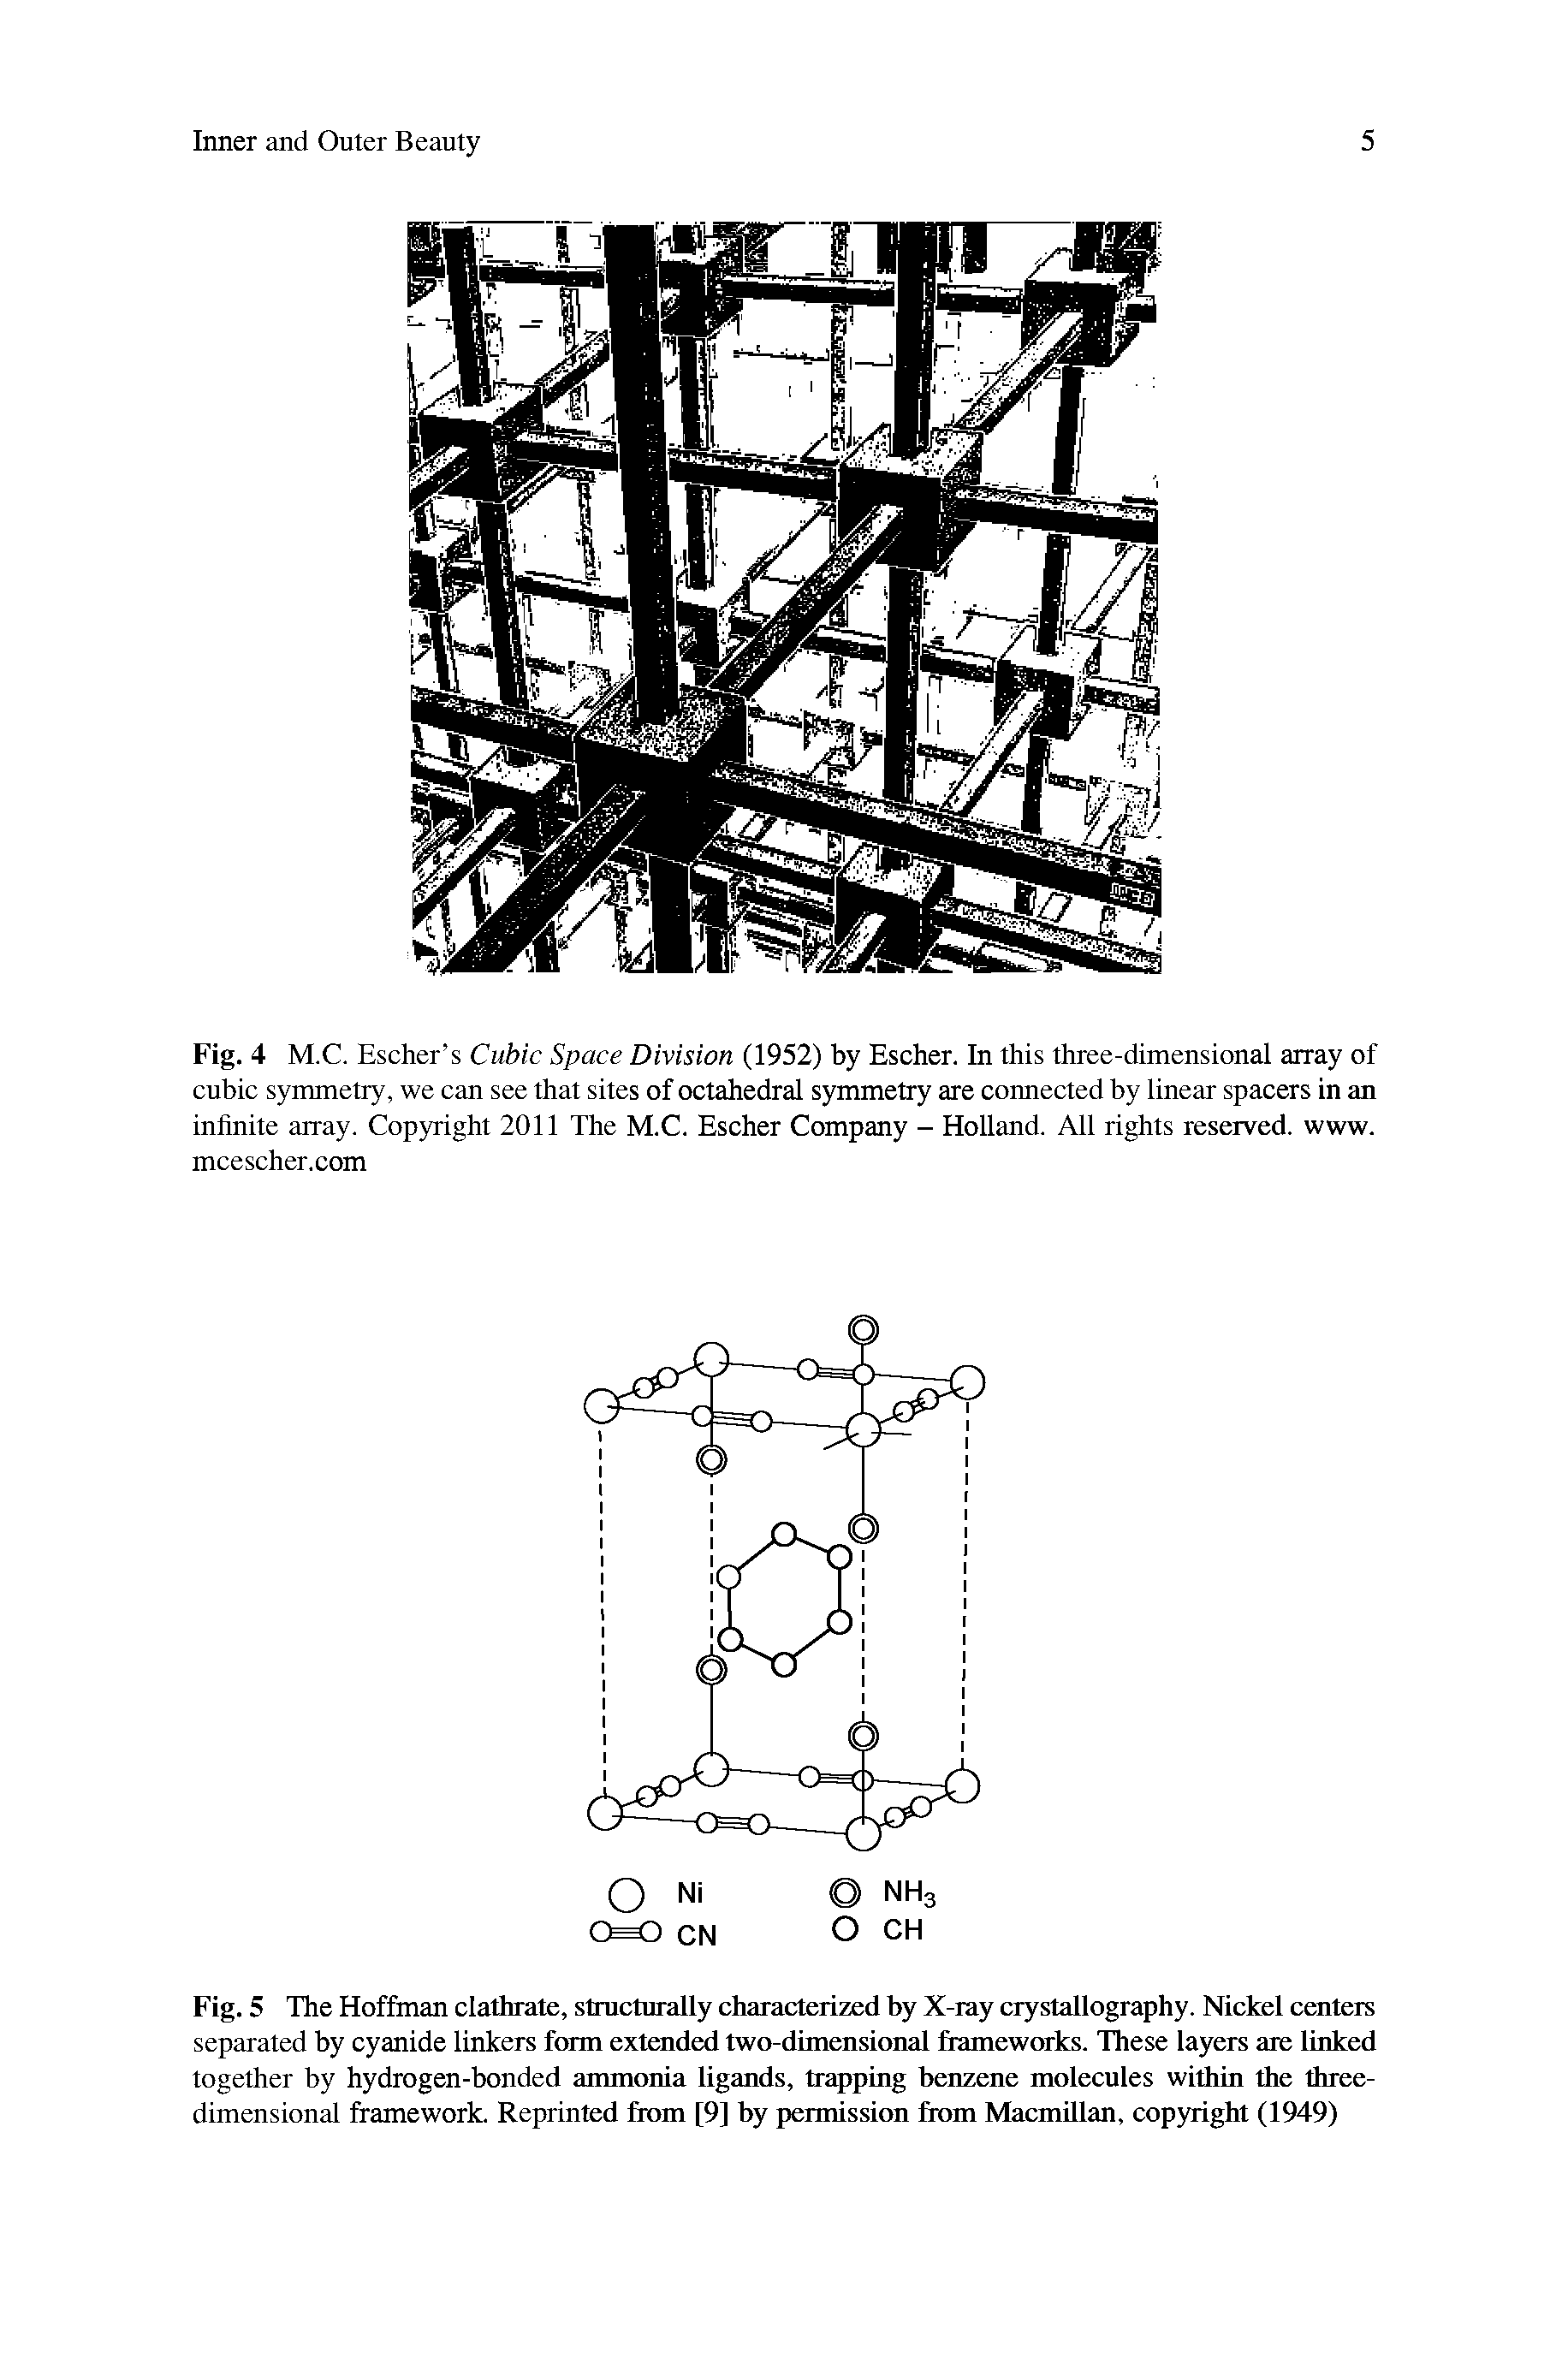 Fig. 5 The Hoffman clathrate, structurally characterized by X-ray crystallography. Nickel centers separated by cyanide linkers form extended two-dimensional frameworks. These layers are linked together by hydrogen-bonded ammonia ligands, trapping benzene molecules within the three-dimensional framework. Reprinted from [9] by permission from Macmillan, copyright (1949)...